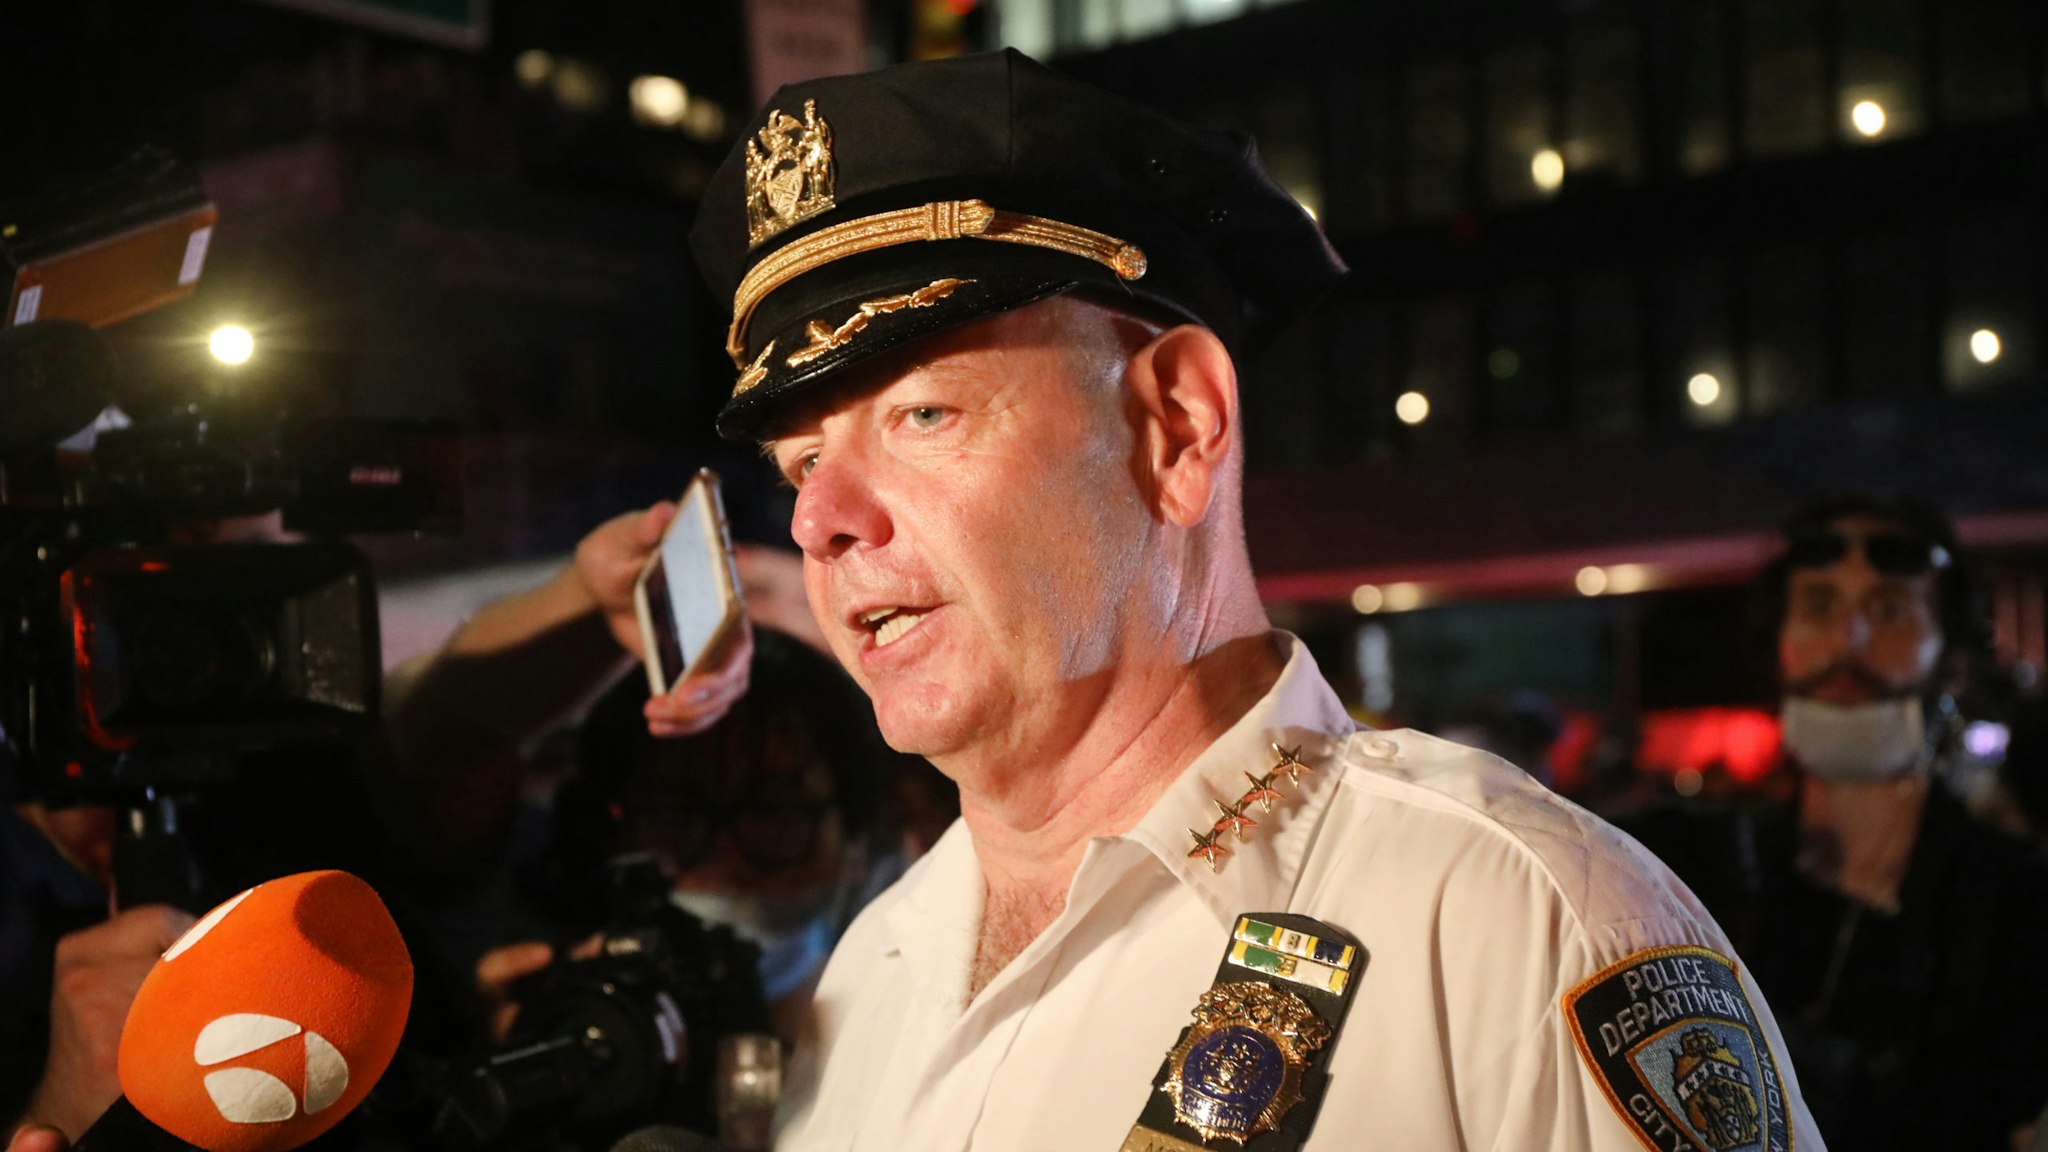 NEW YORK, NEW YORK - JUNE 03: Chief of Department Terence Monahan, the New York Police Department’s highest-ranking uniformed officer, speaks to the media at the scene of a mass arrest of protesters in Manhattan over the killing of George Floyd by a Minneapolis Police officer on June 03, 2020 in New York City. The white police officer, Derek Chauvin, has been charged with second-degree murder and the three other officers who participated in the arrest have been charged with aiding and abetting second-degree murder. Floyd's death, the most recent in a series of deaths of black Americans at the hands of police, has set off days and nights of protests across the country.